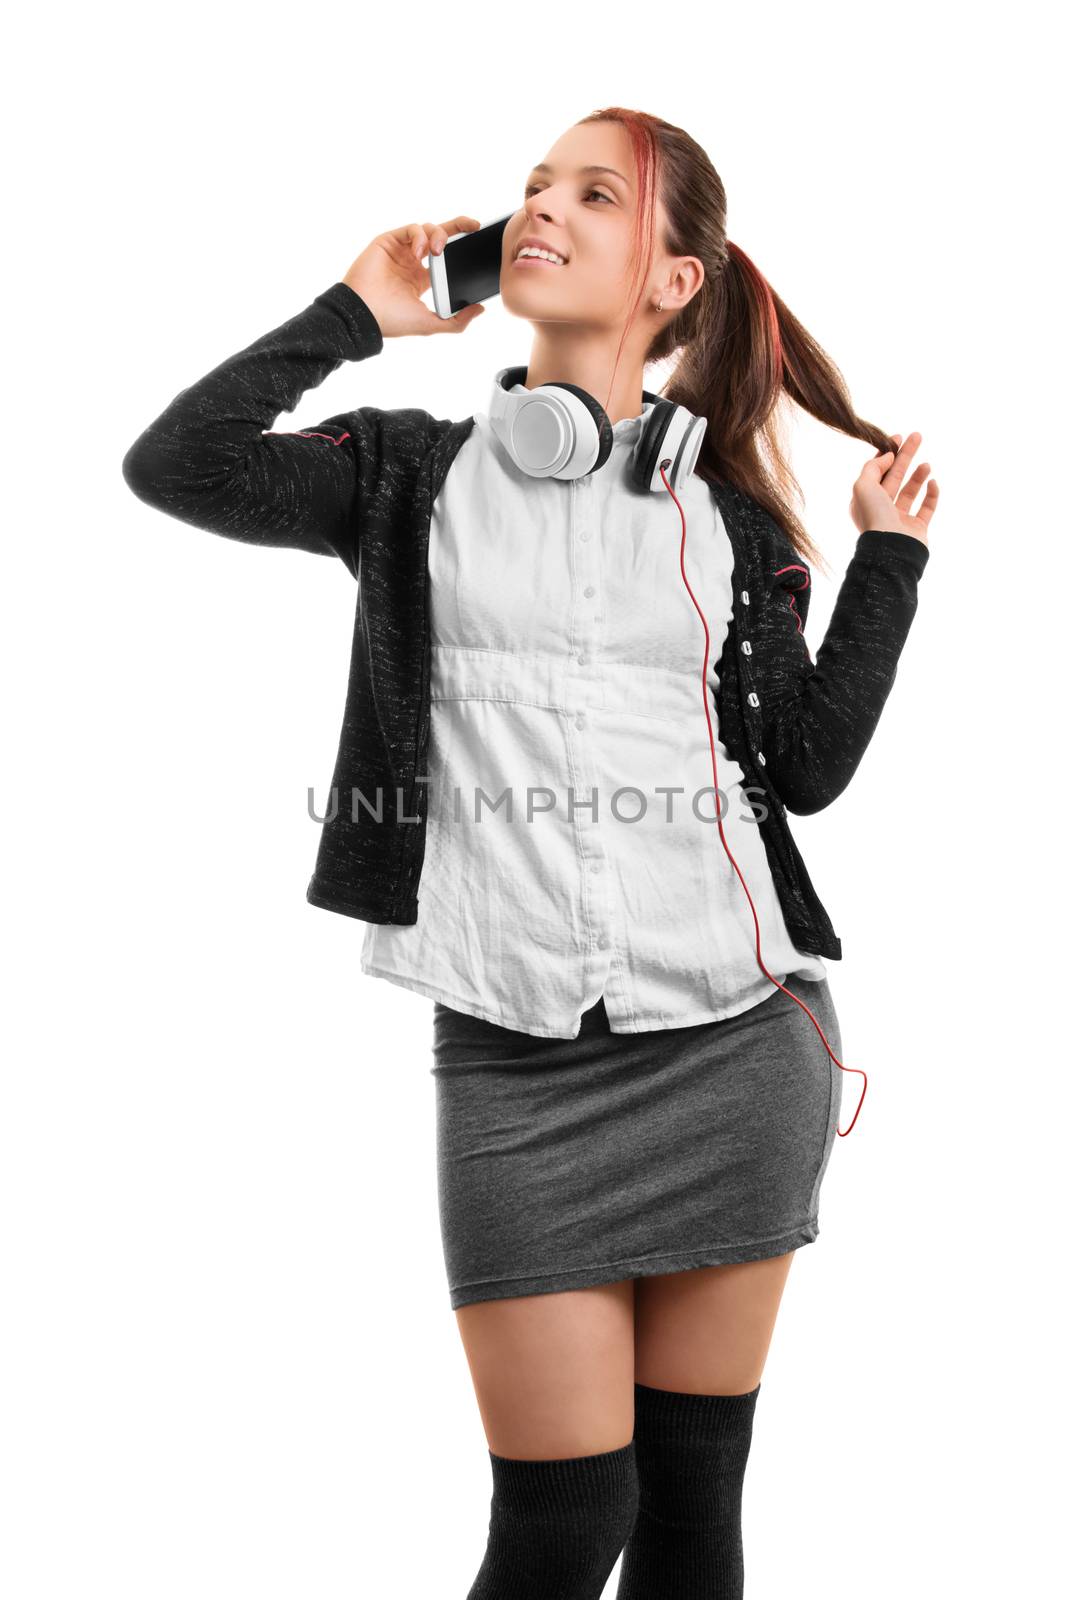 Hey, what's up? Beautiful smiling young girl in school uniform talking on the phone, isolated on white background.